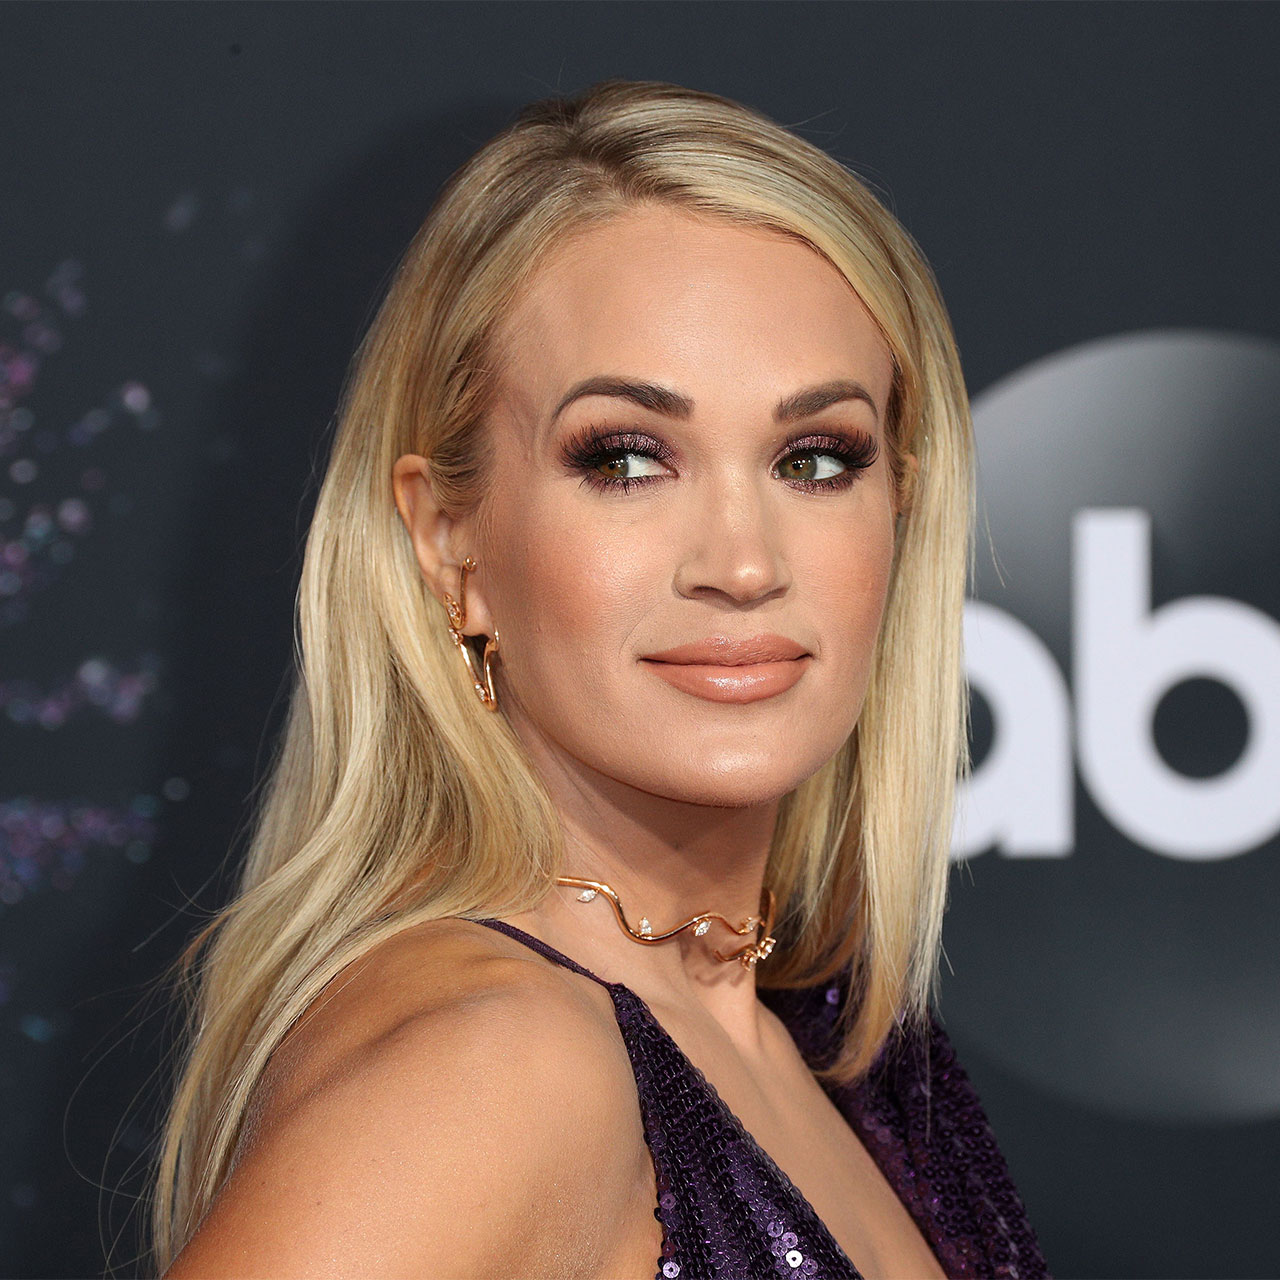 Carrie Underwood makes TWO wardrobe changes as she accepts award